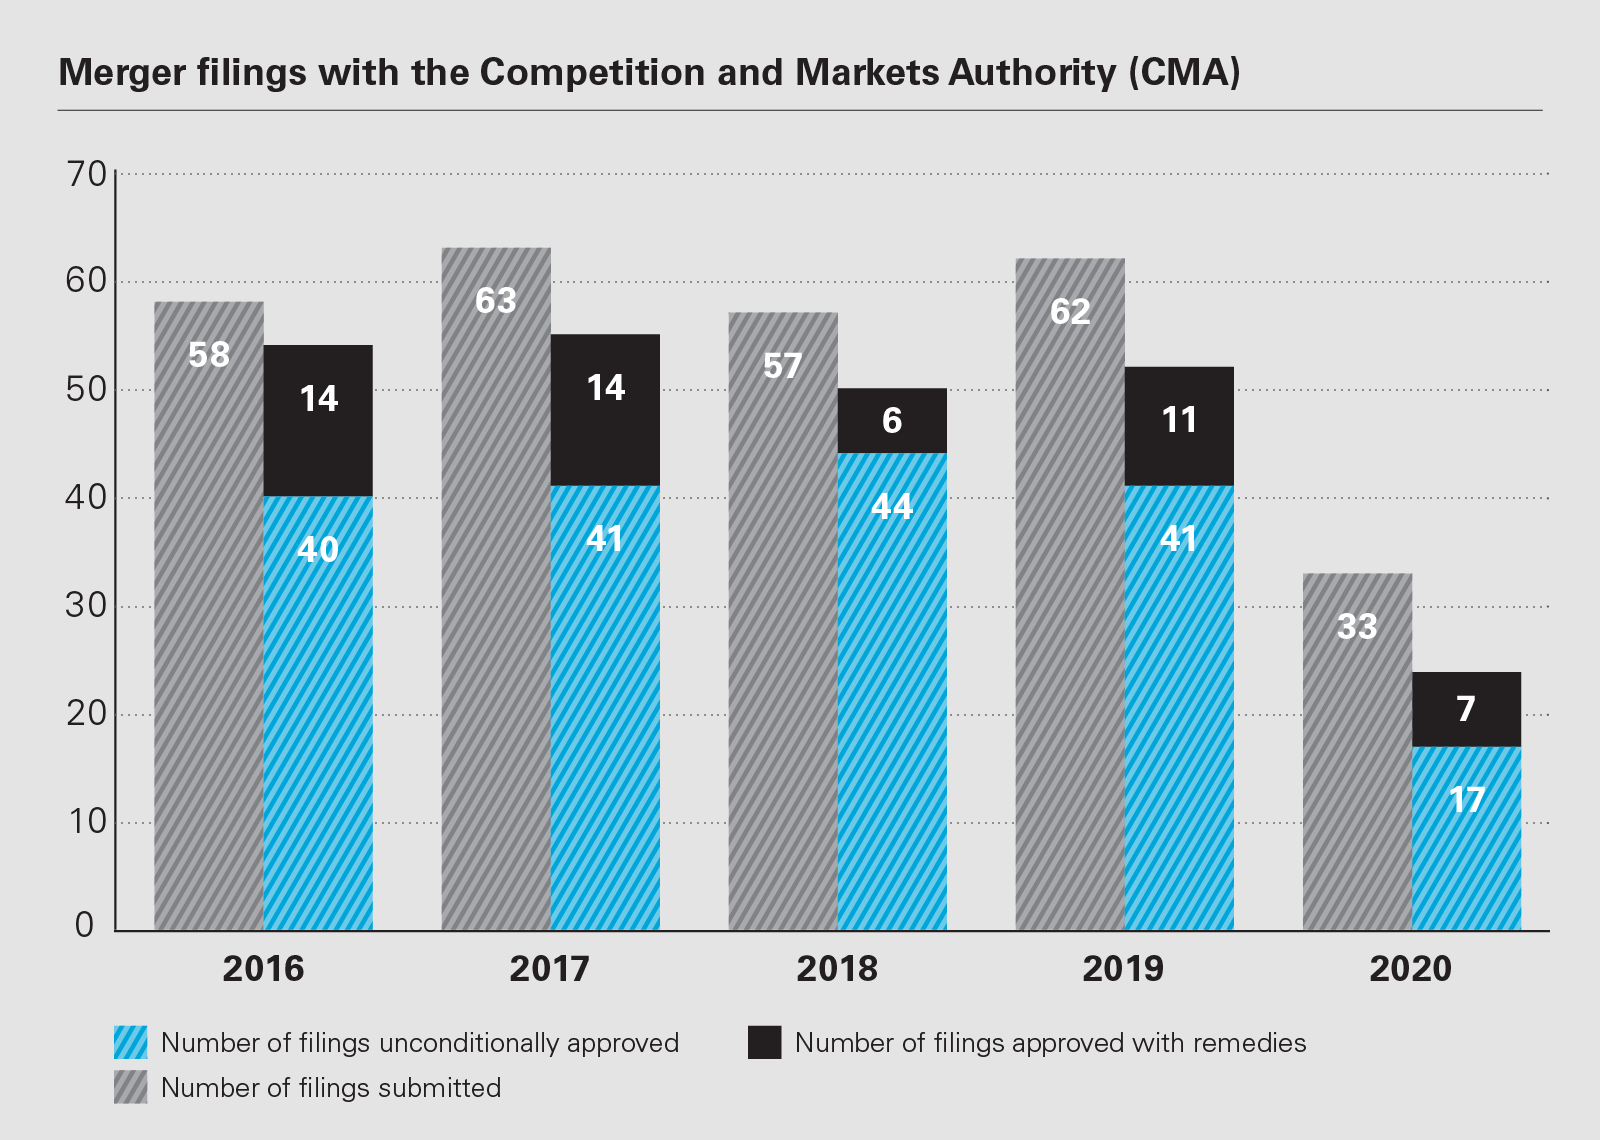 Merger filings with the Competition and Markets Authority (CMA)